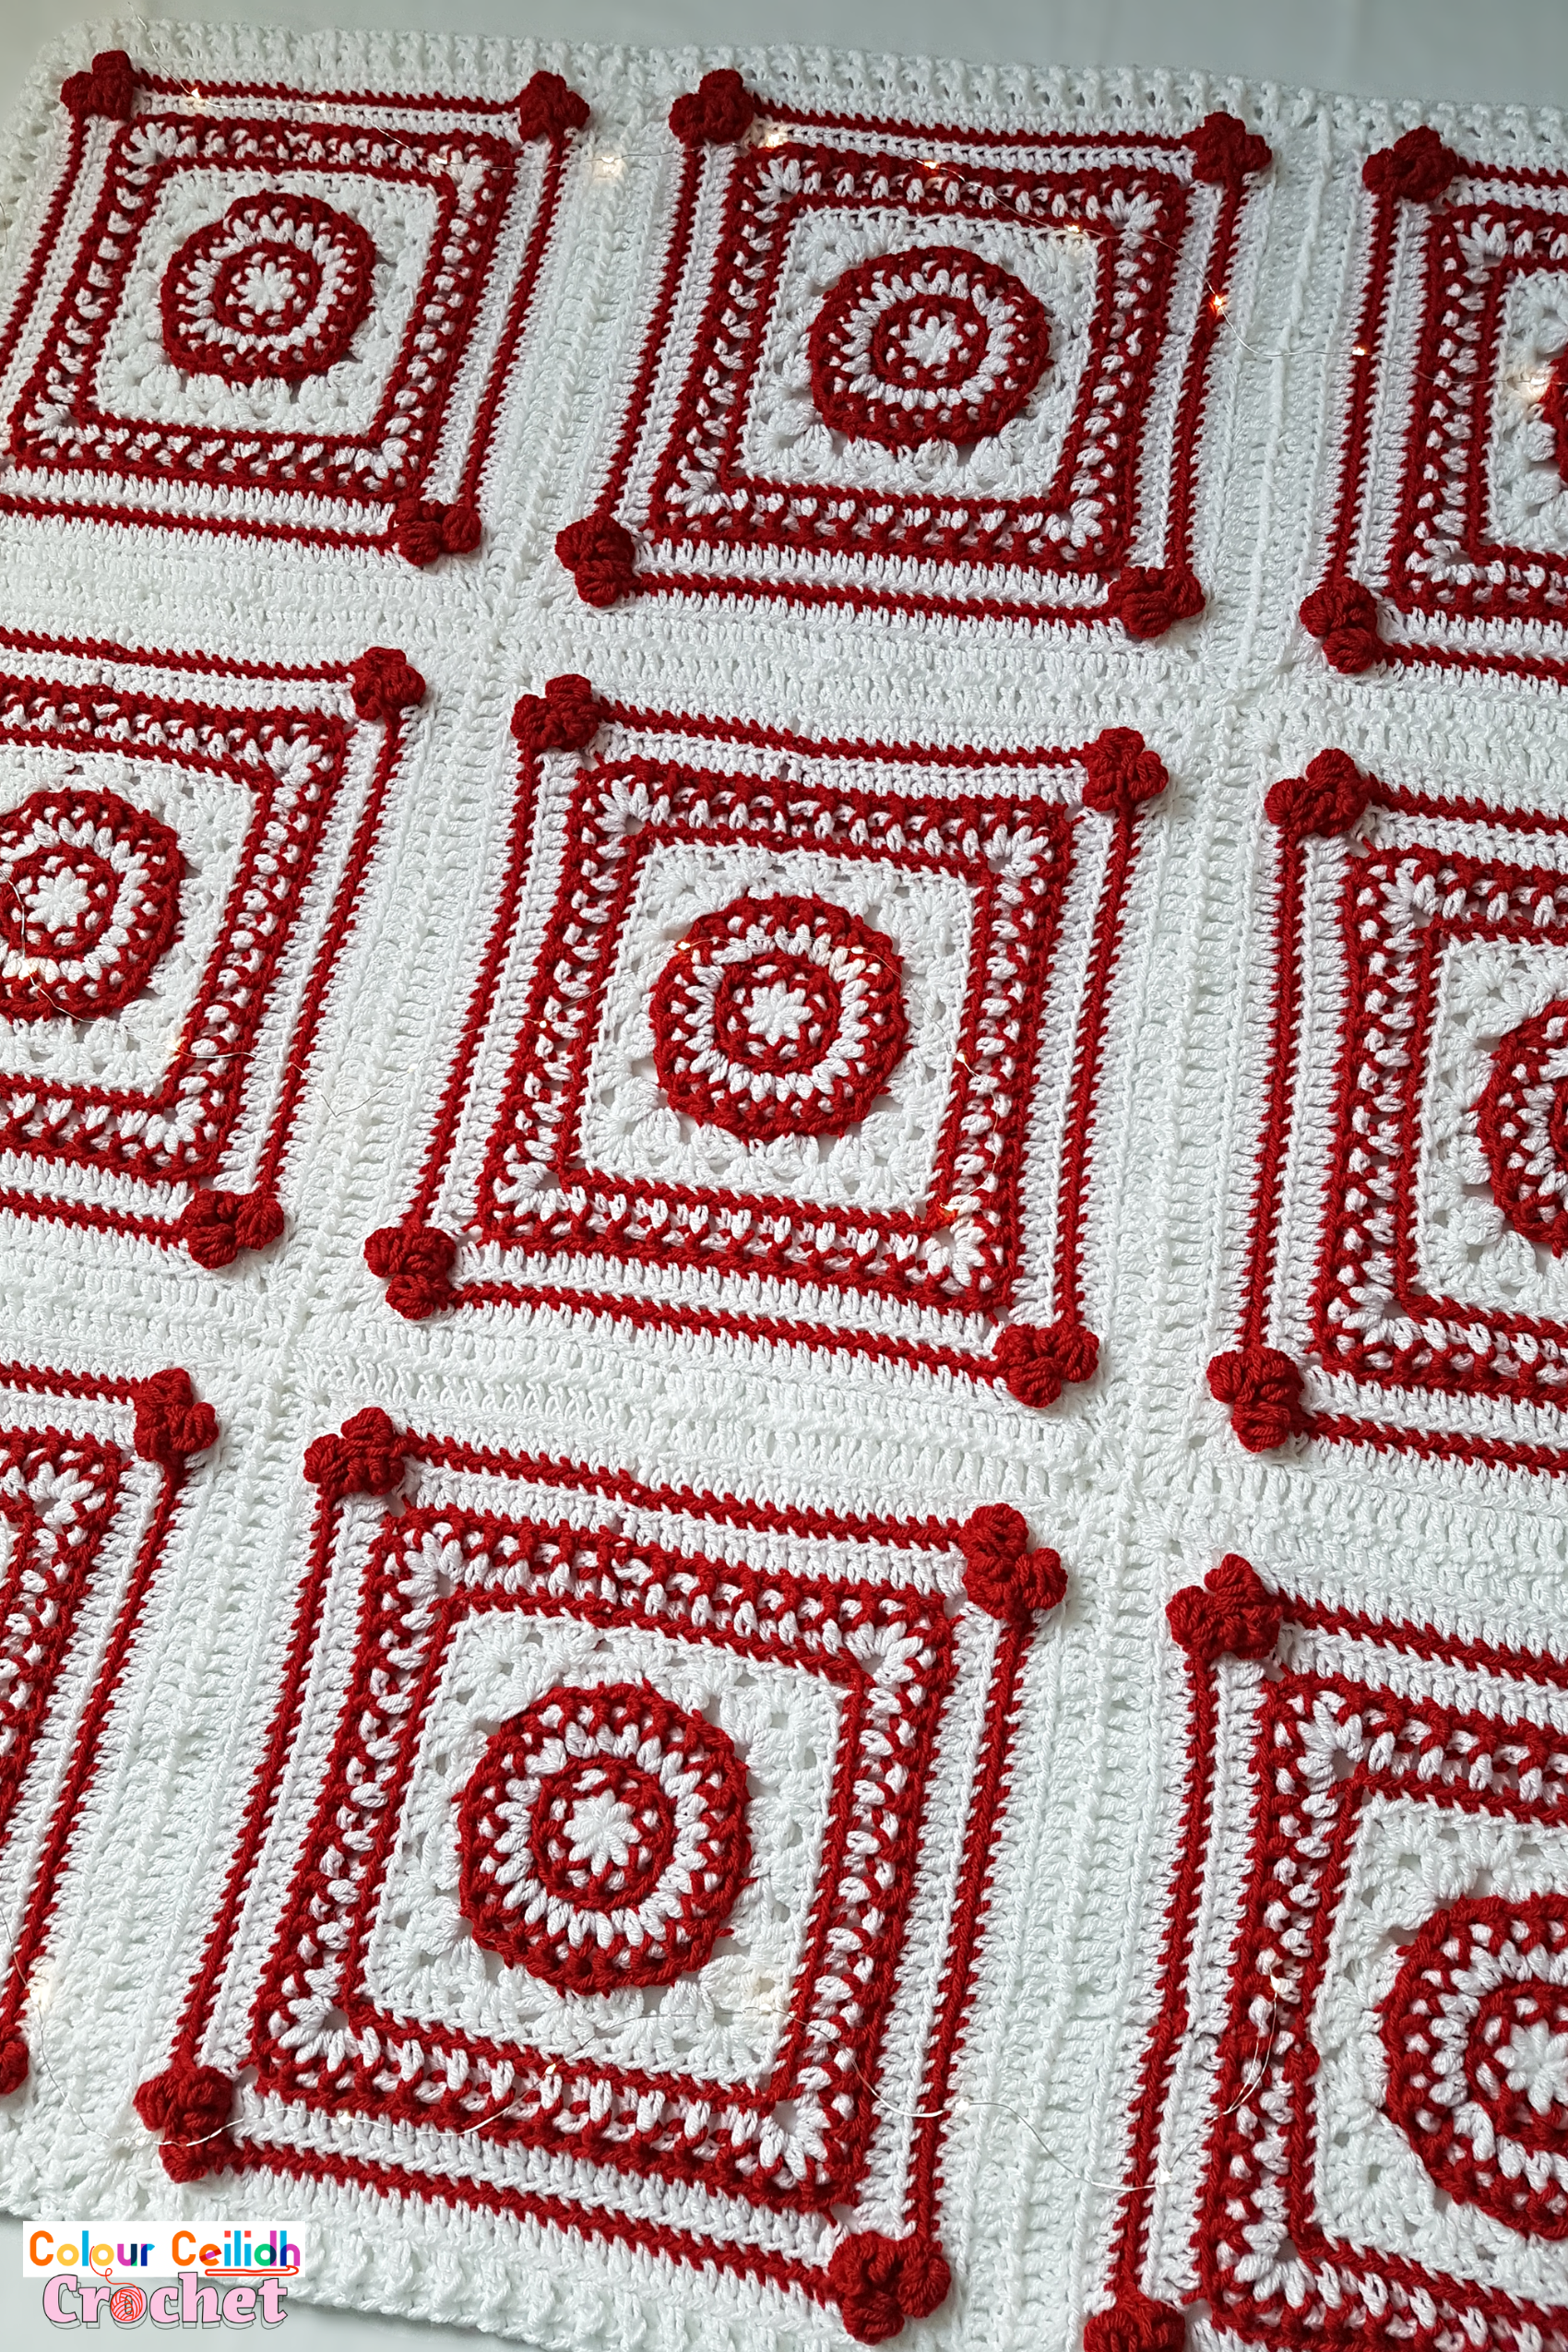 This Christmas crochet blanket pattern is a Scandinavian style afghan with bobble hearts and eight-pointed Nordic stars. Using worsted weight yarn I combine two bold red and white colors for maximum effect to instantly set the Christmas atmosphere. This free pattern includes a YouTube video tutorial. Matching Scandinavian style crochet baubles are available as a separate pattern.